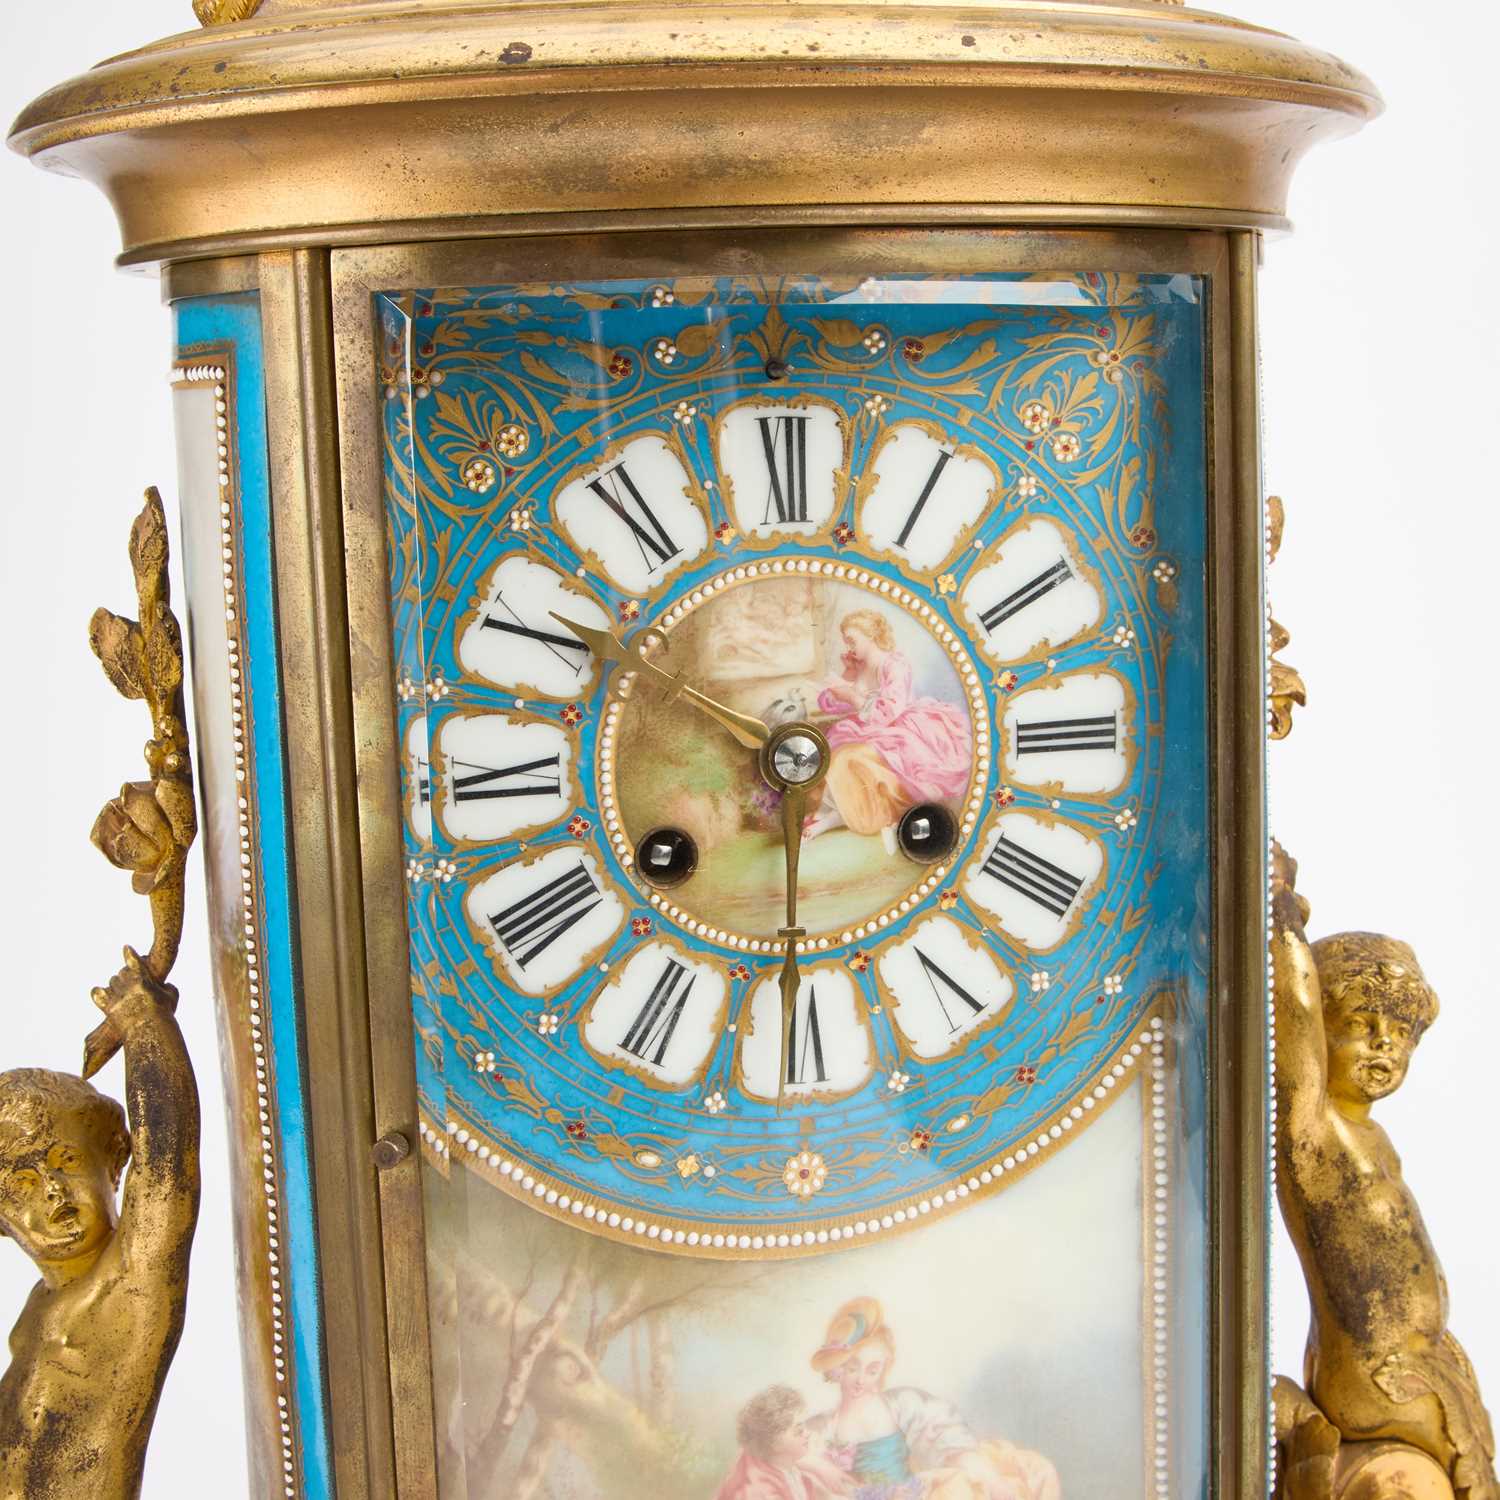 A FINE 19TH CENTURY FRENCH ORMOLU-MOUNTED 'SÈVRES' PORCELAIN CLOCK GARNITURE - Image 2 of 5